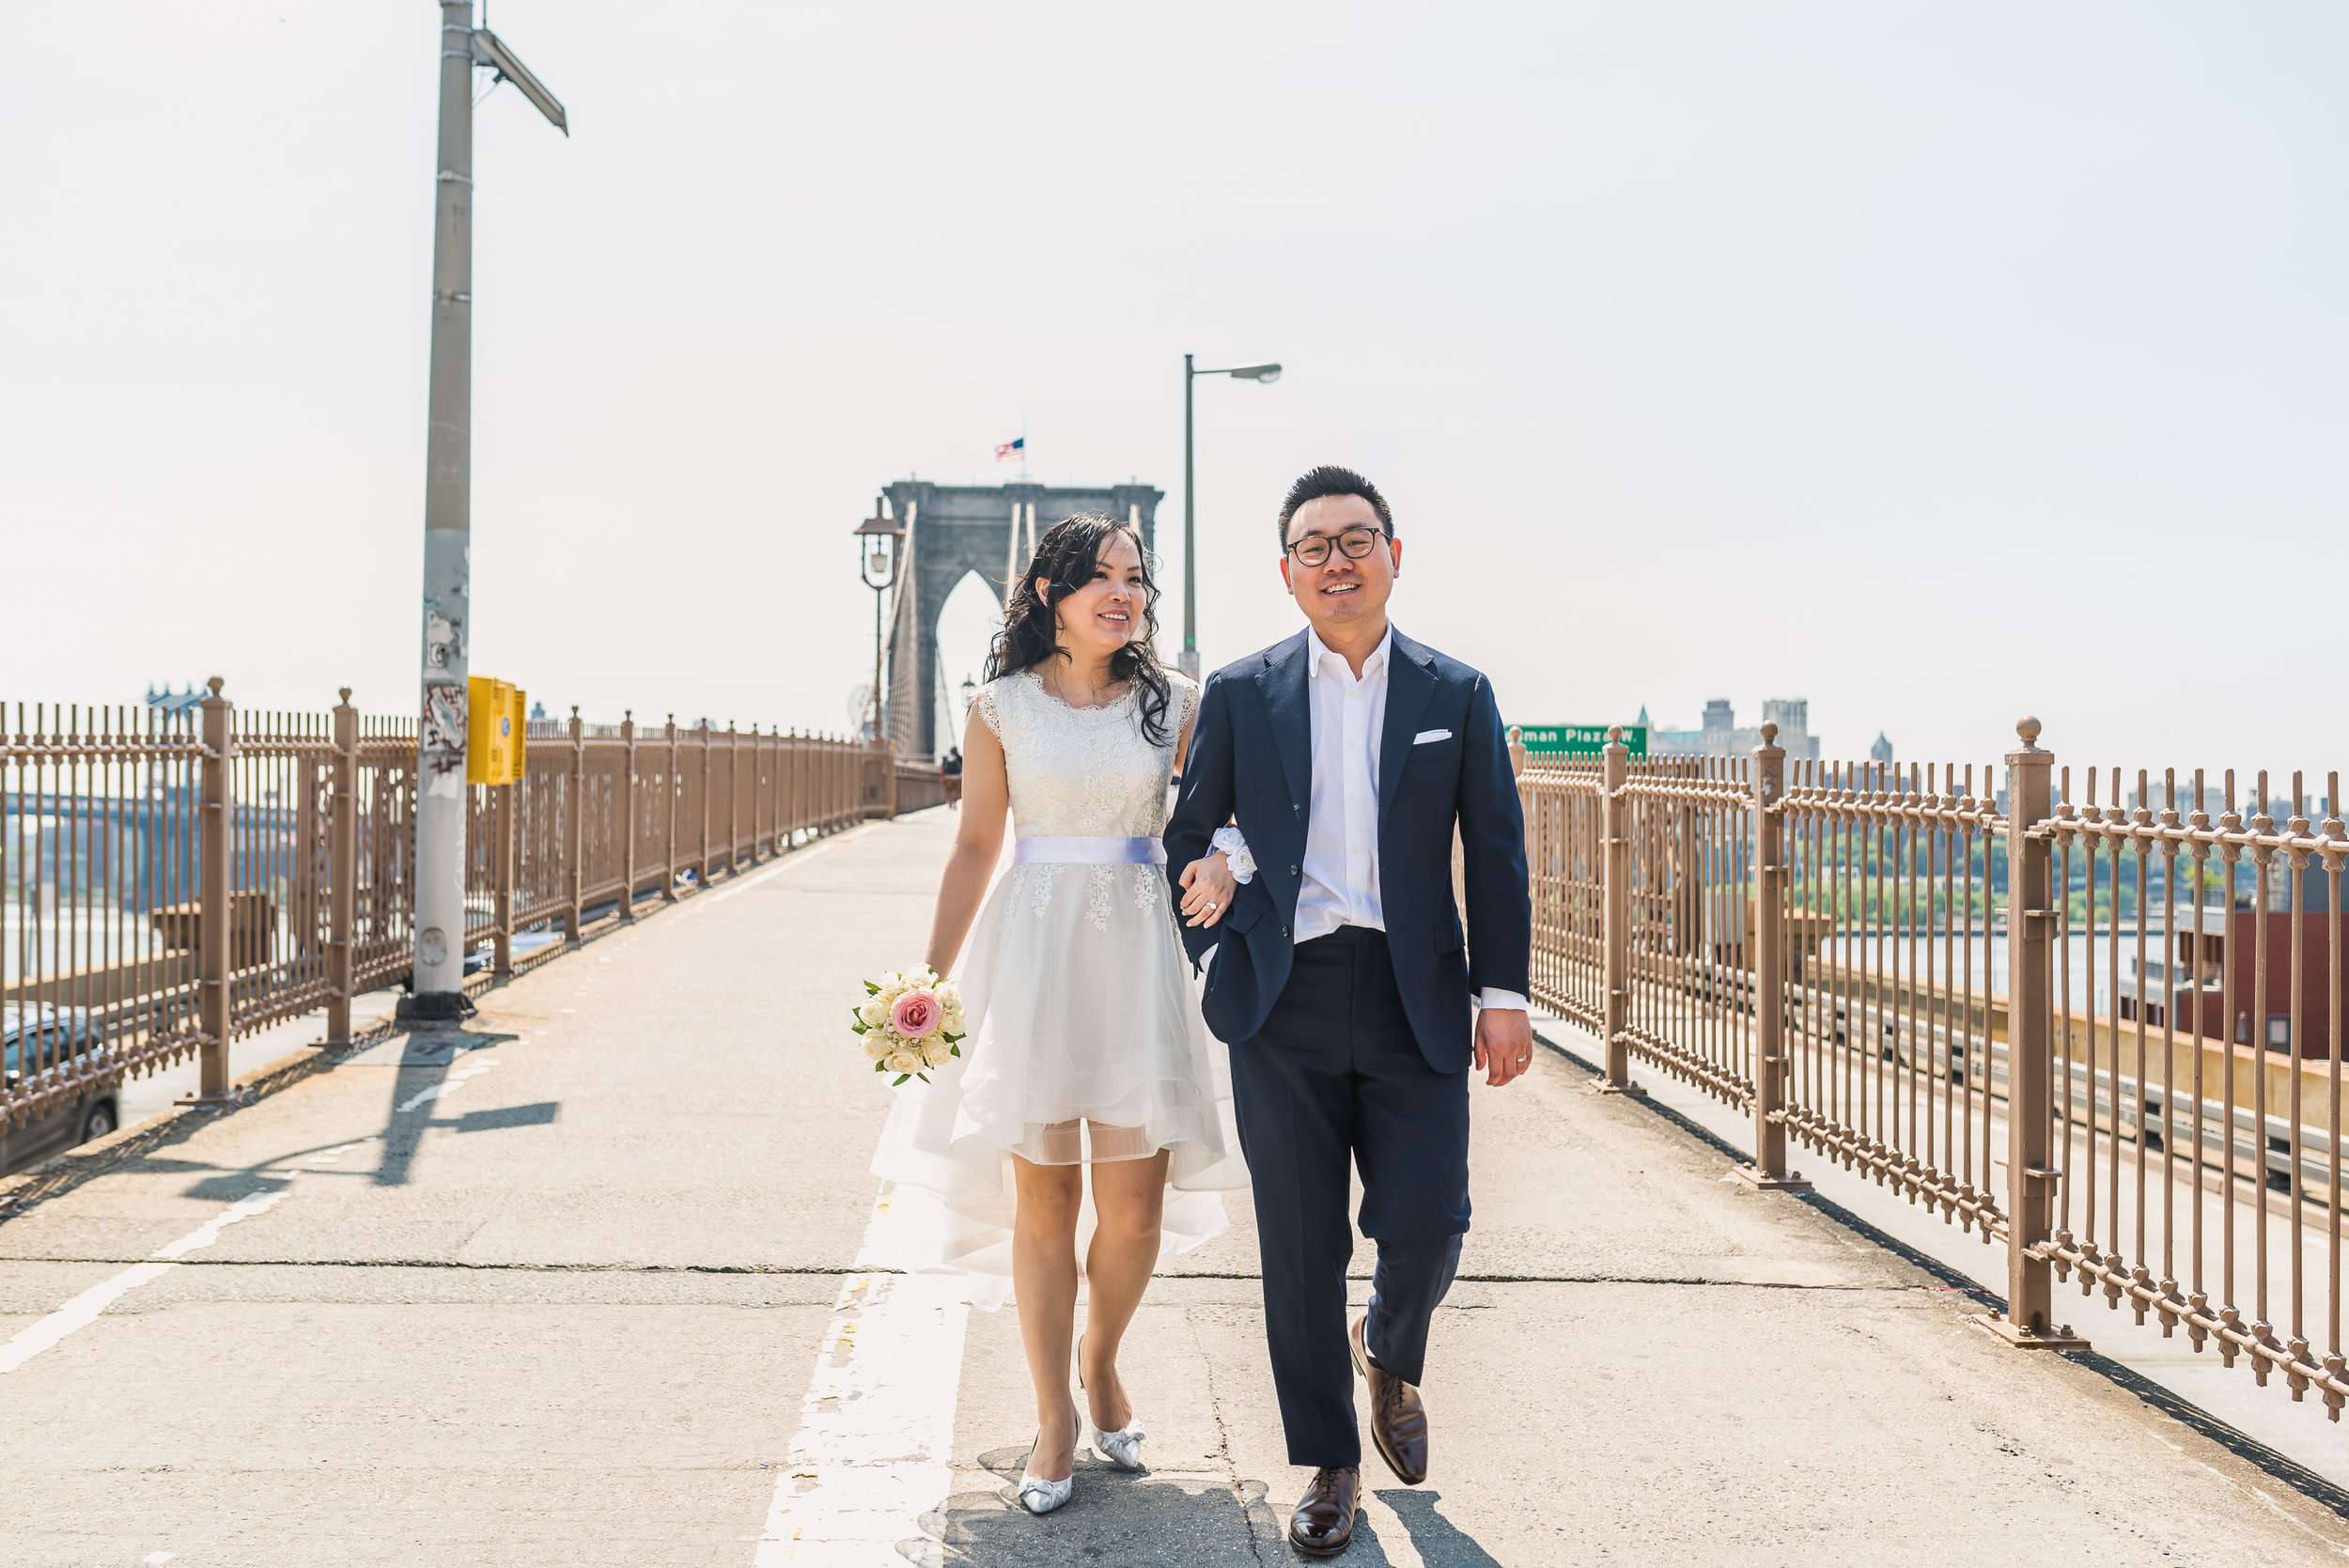  many and andy had a low key ceremony at city hall in manhattan, new york. Part of being a photojournalistic photographer is being able to set up natural looking photos that tell the story of their day. after the ceremony, we took some photos in the 